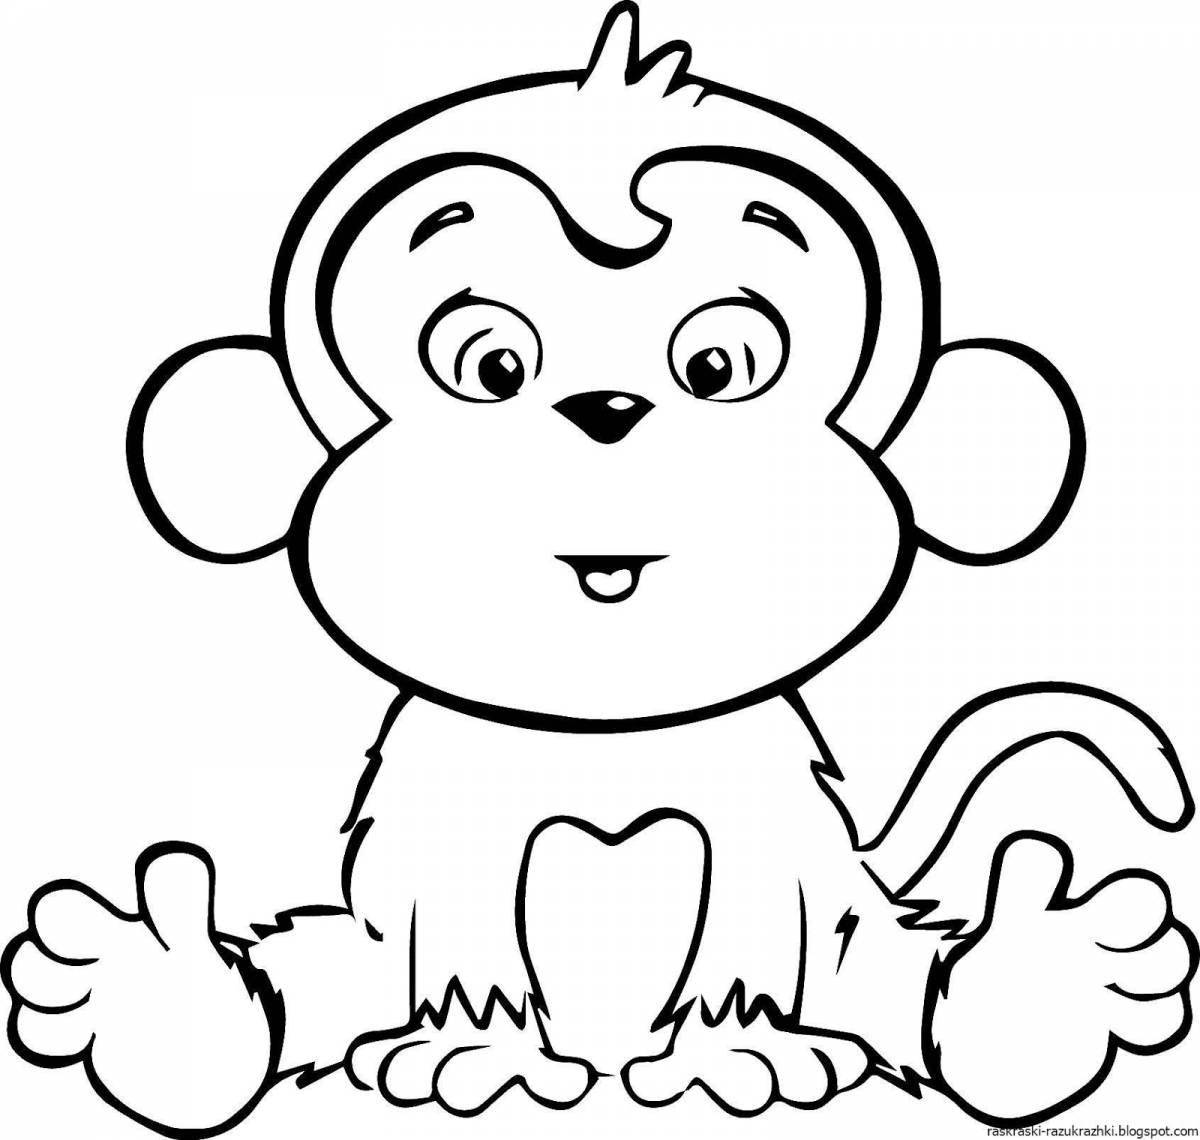 Cute animal coloring pages for 10 year olds